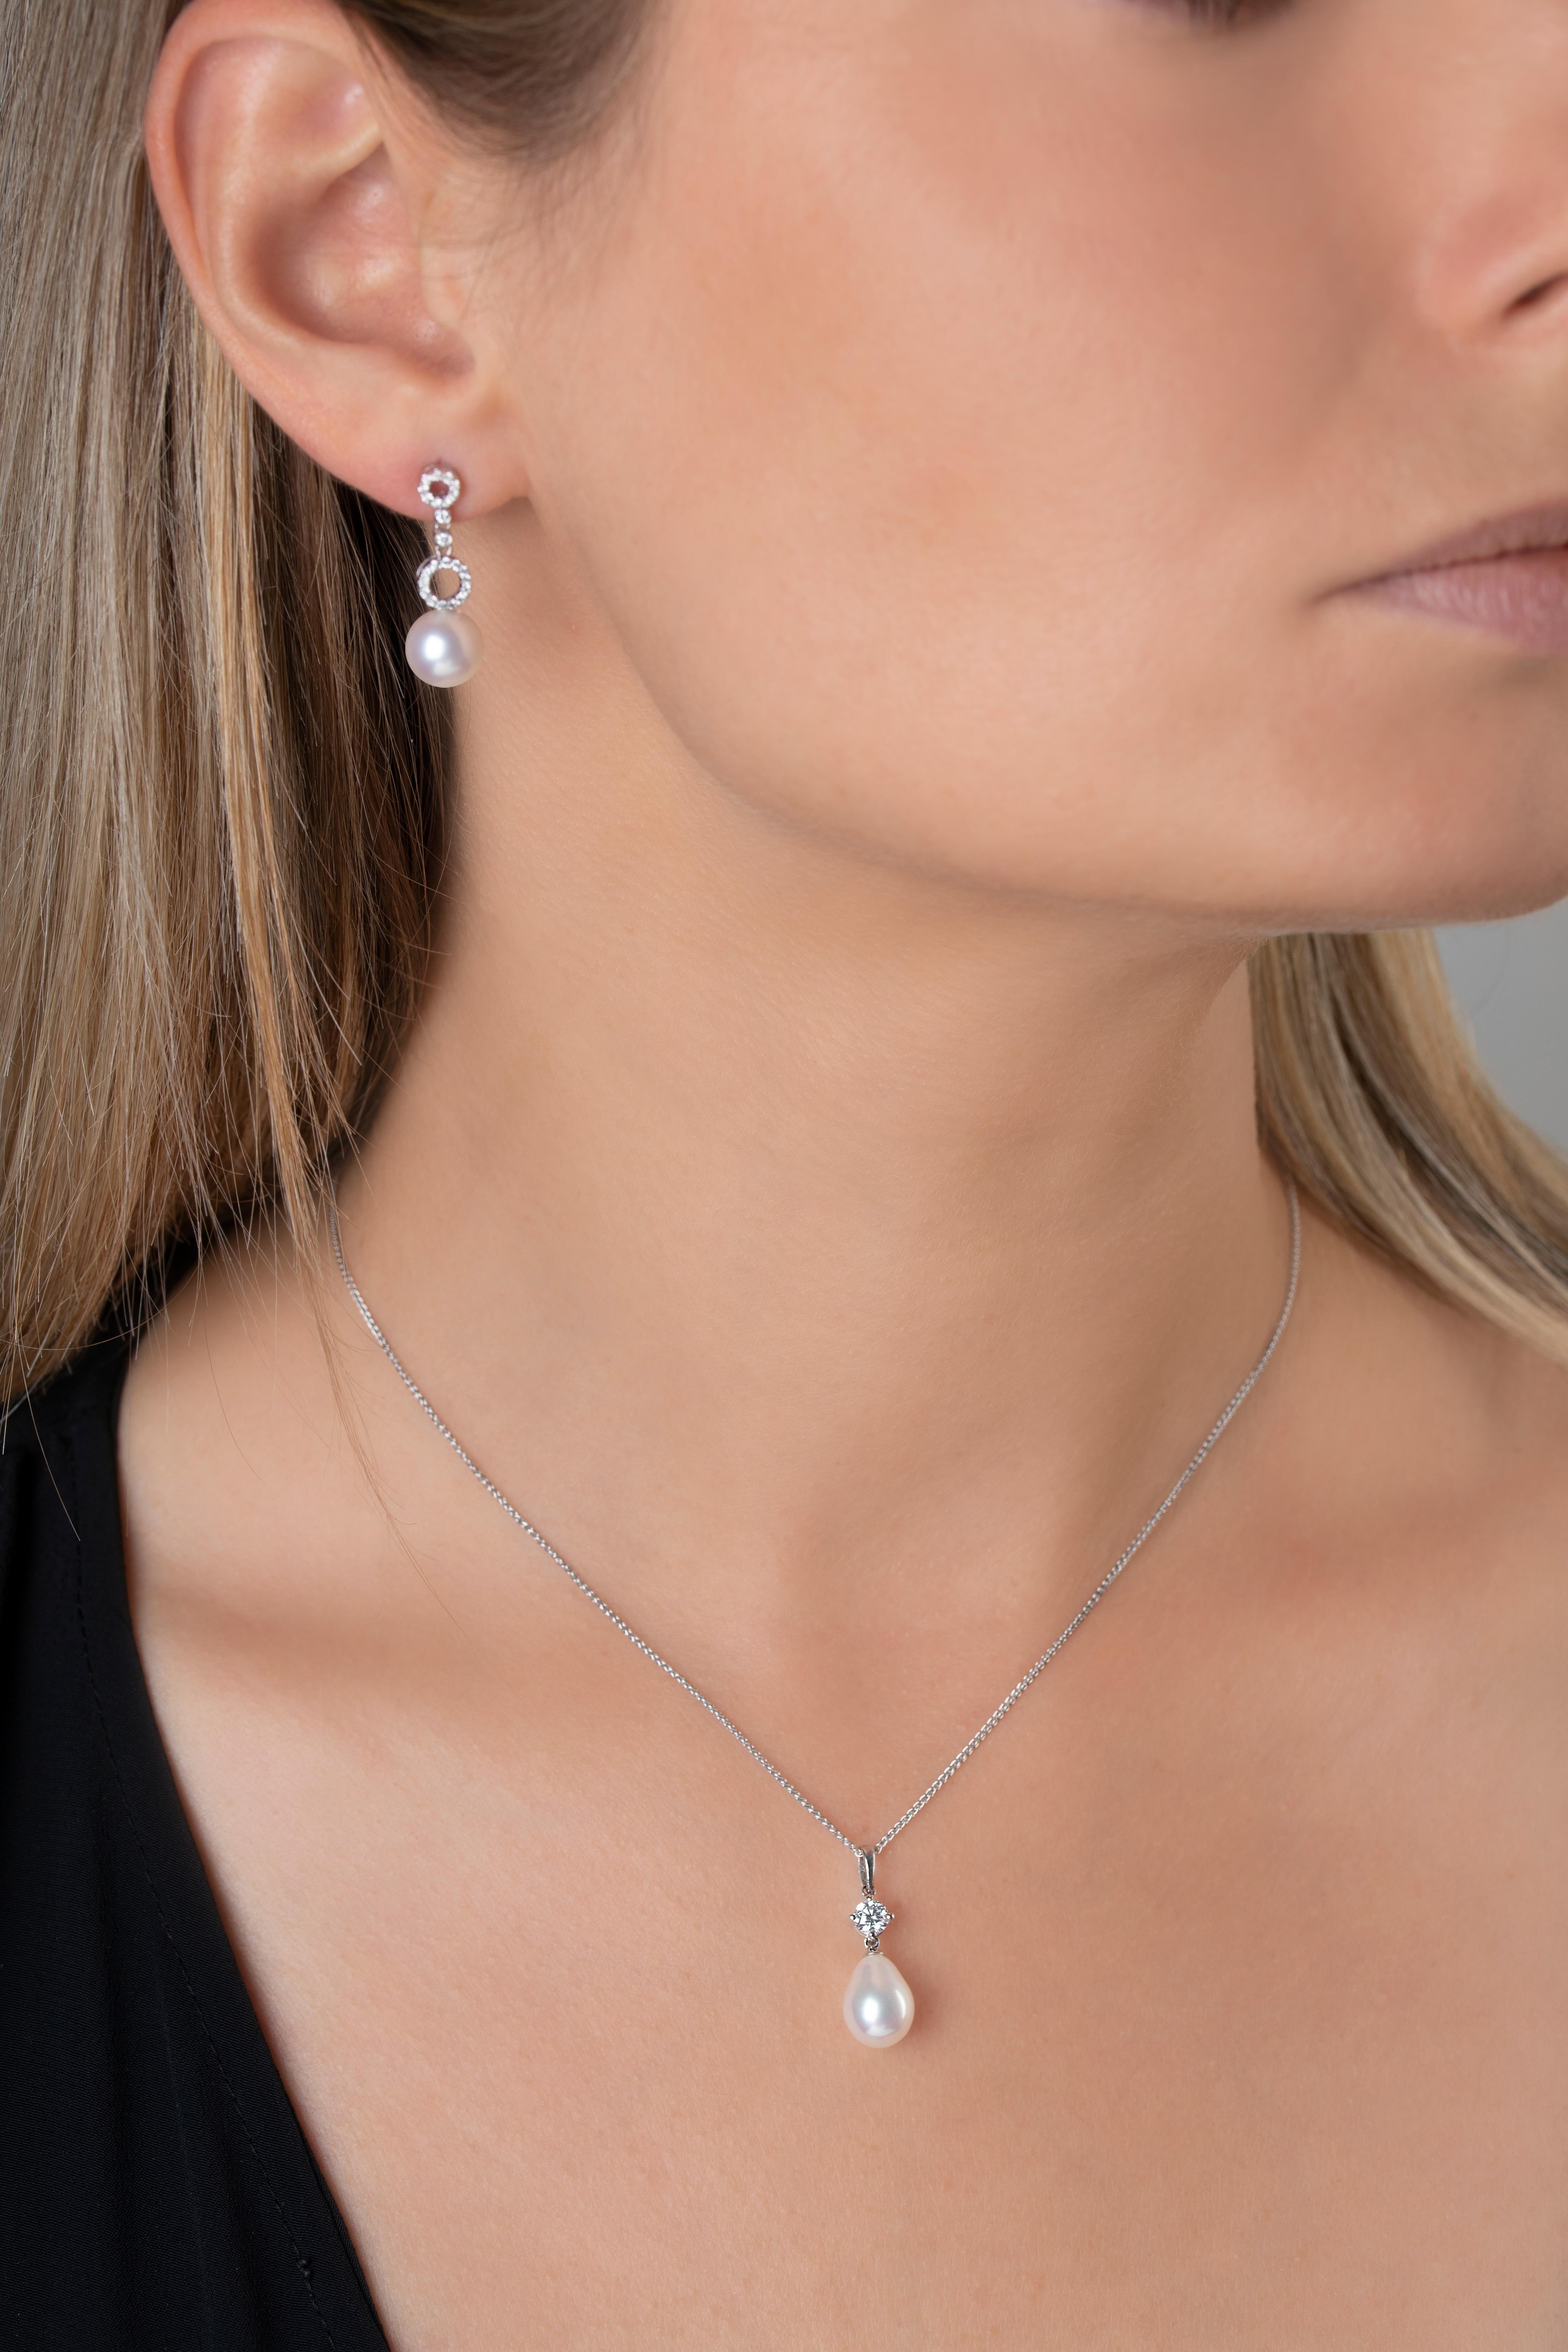 This elegant Yoko London pendant features a sparkling diamond atop a lustrous drop shaped cultured freshwater pearl. Elegant and simplistic, this piece is easily styled with casual and formal outfits.
-11-12mm Drop Shaped Cultured Freshwater